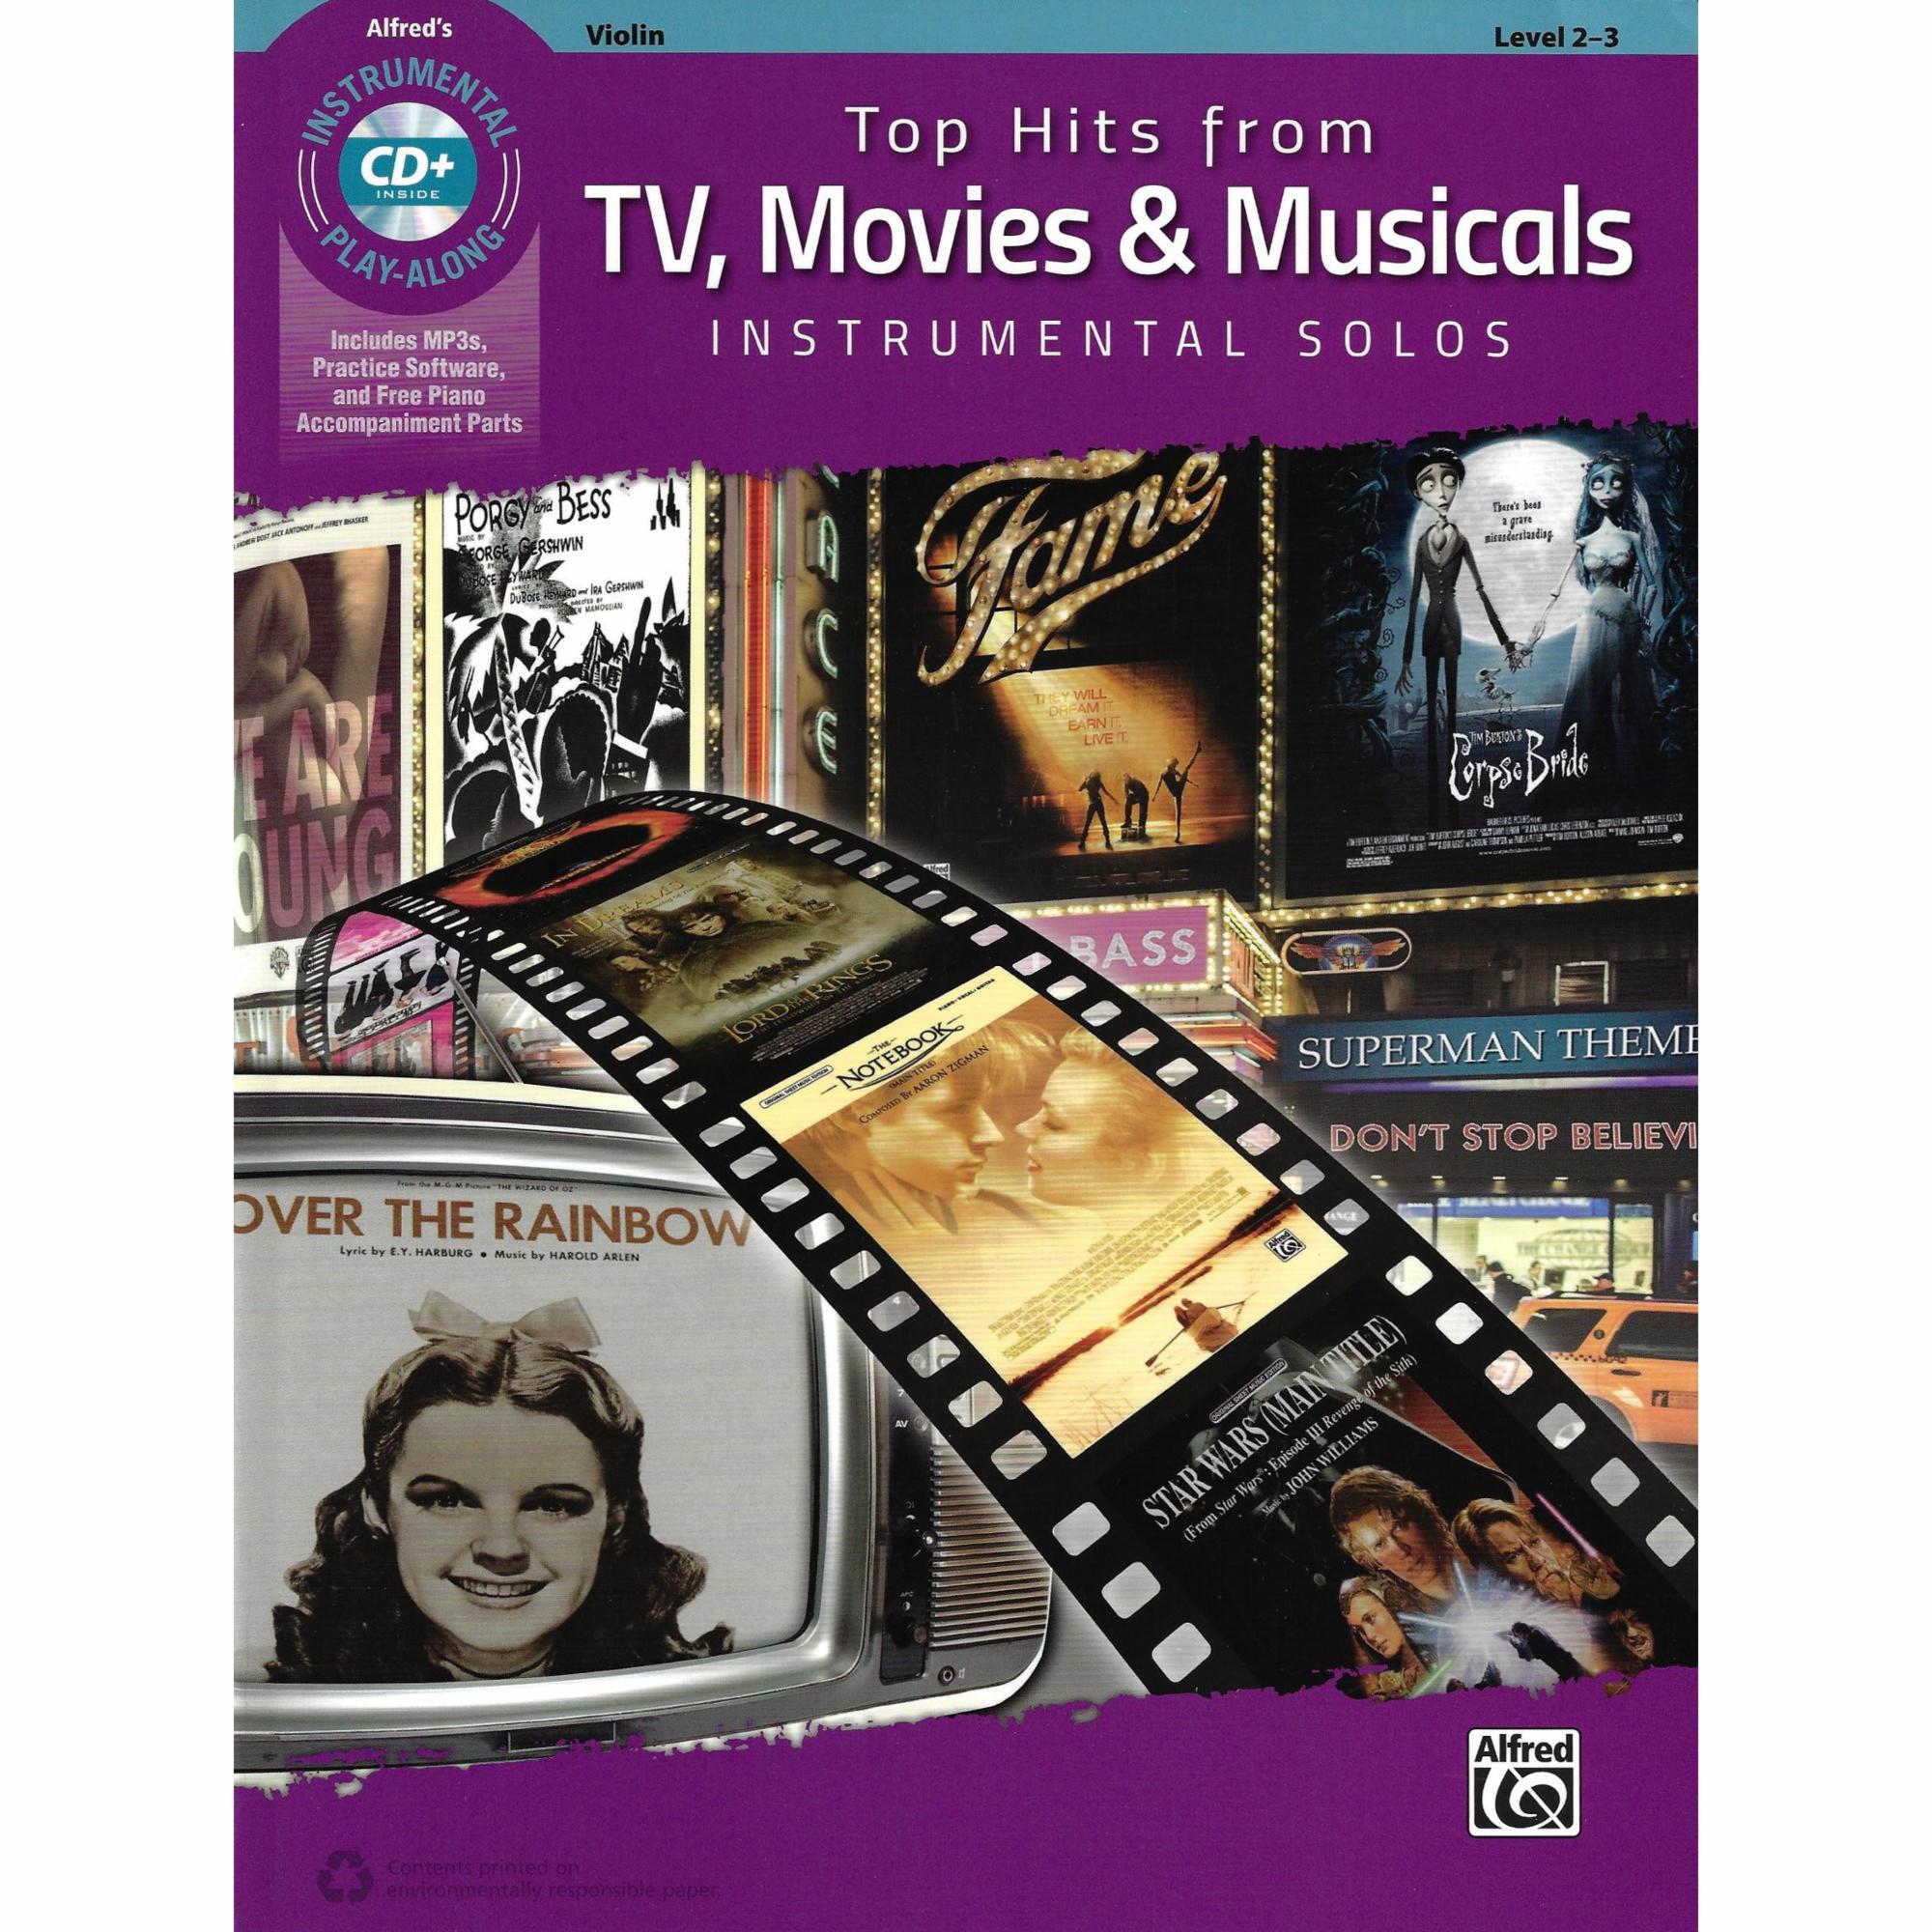 Top Hits from TV, Movies & Musicals for Violin, Viola, or Cello